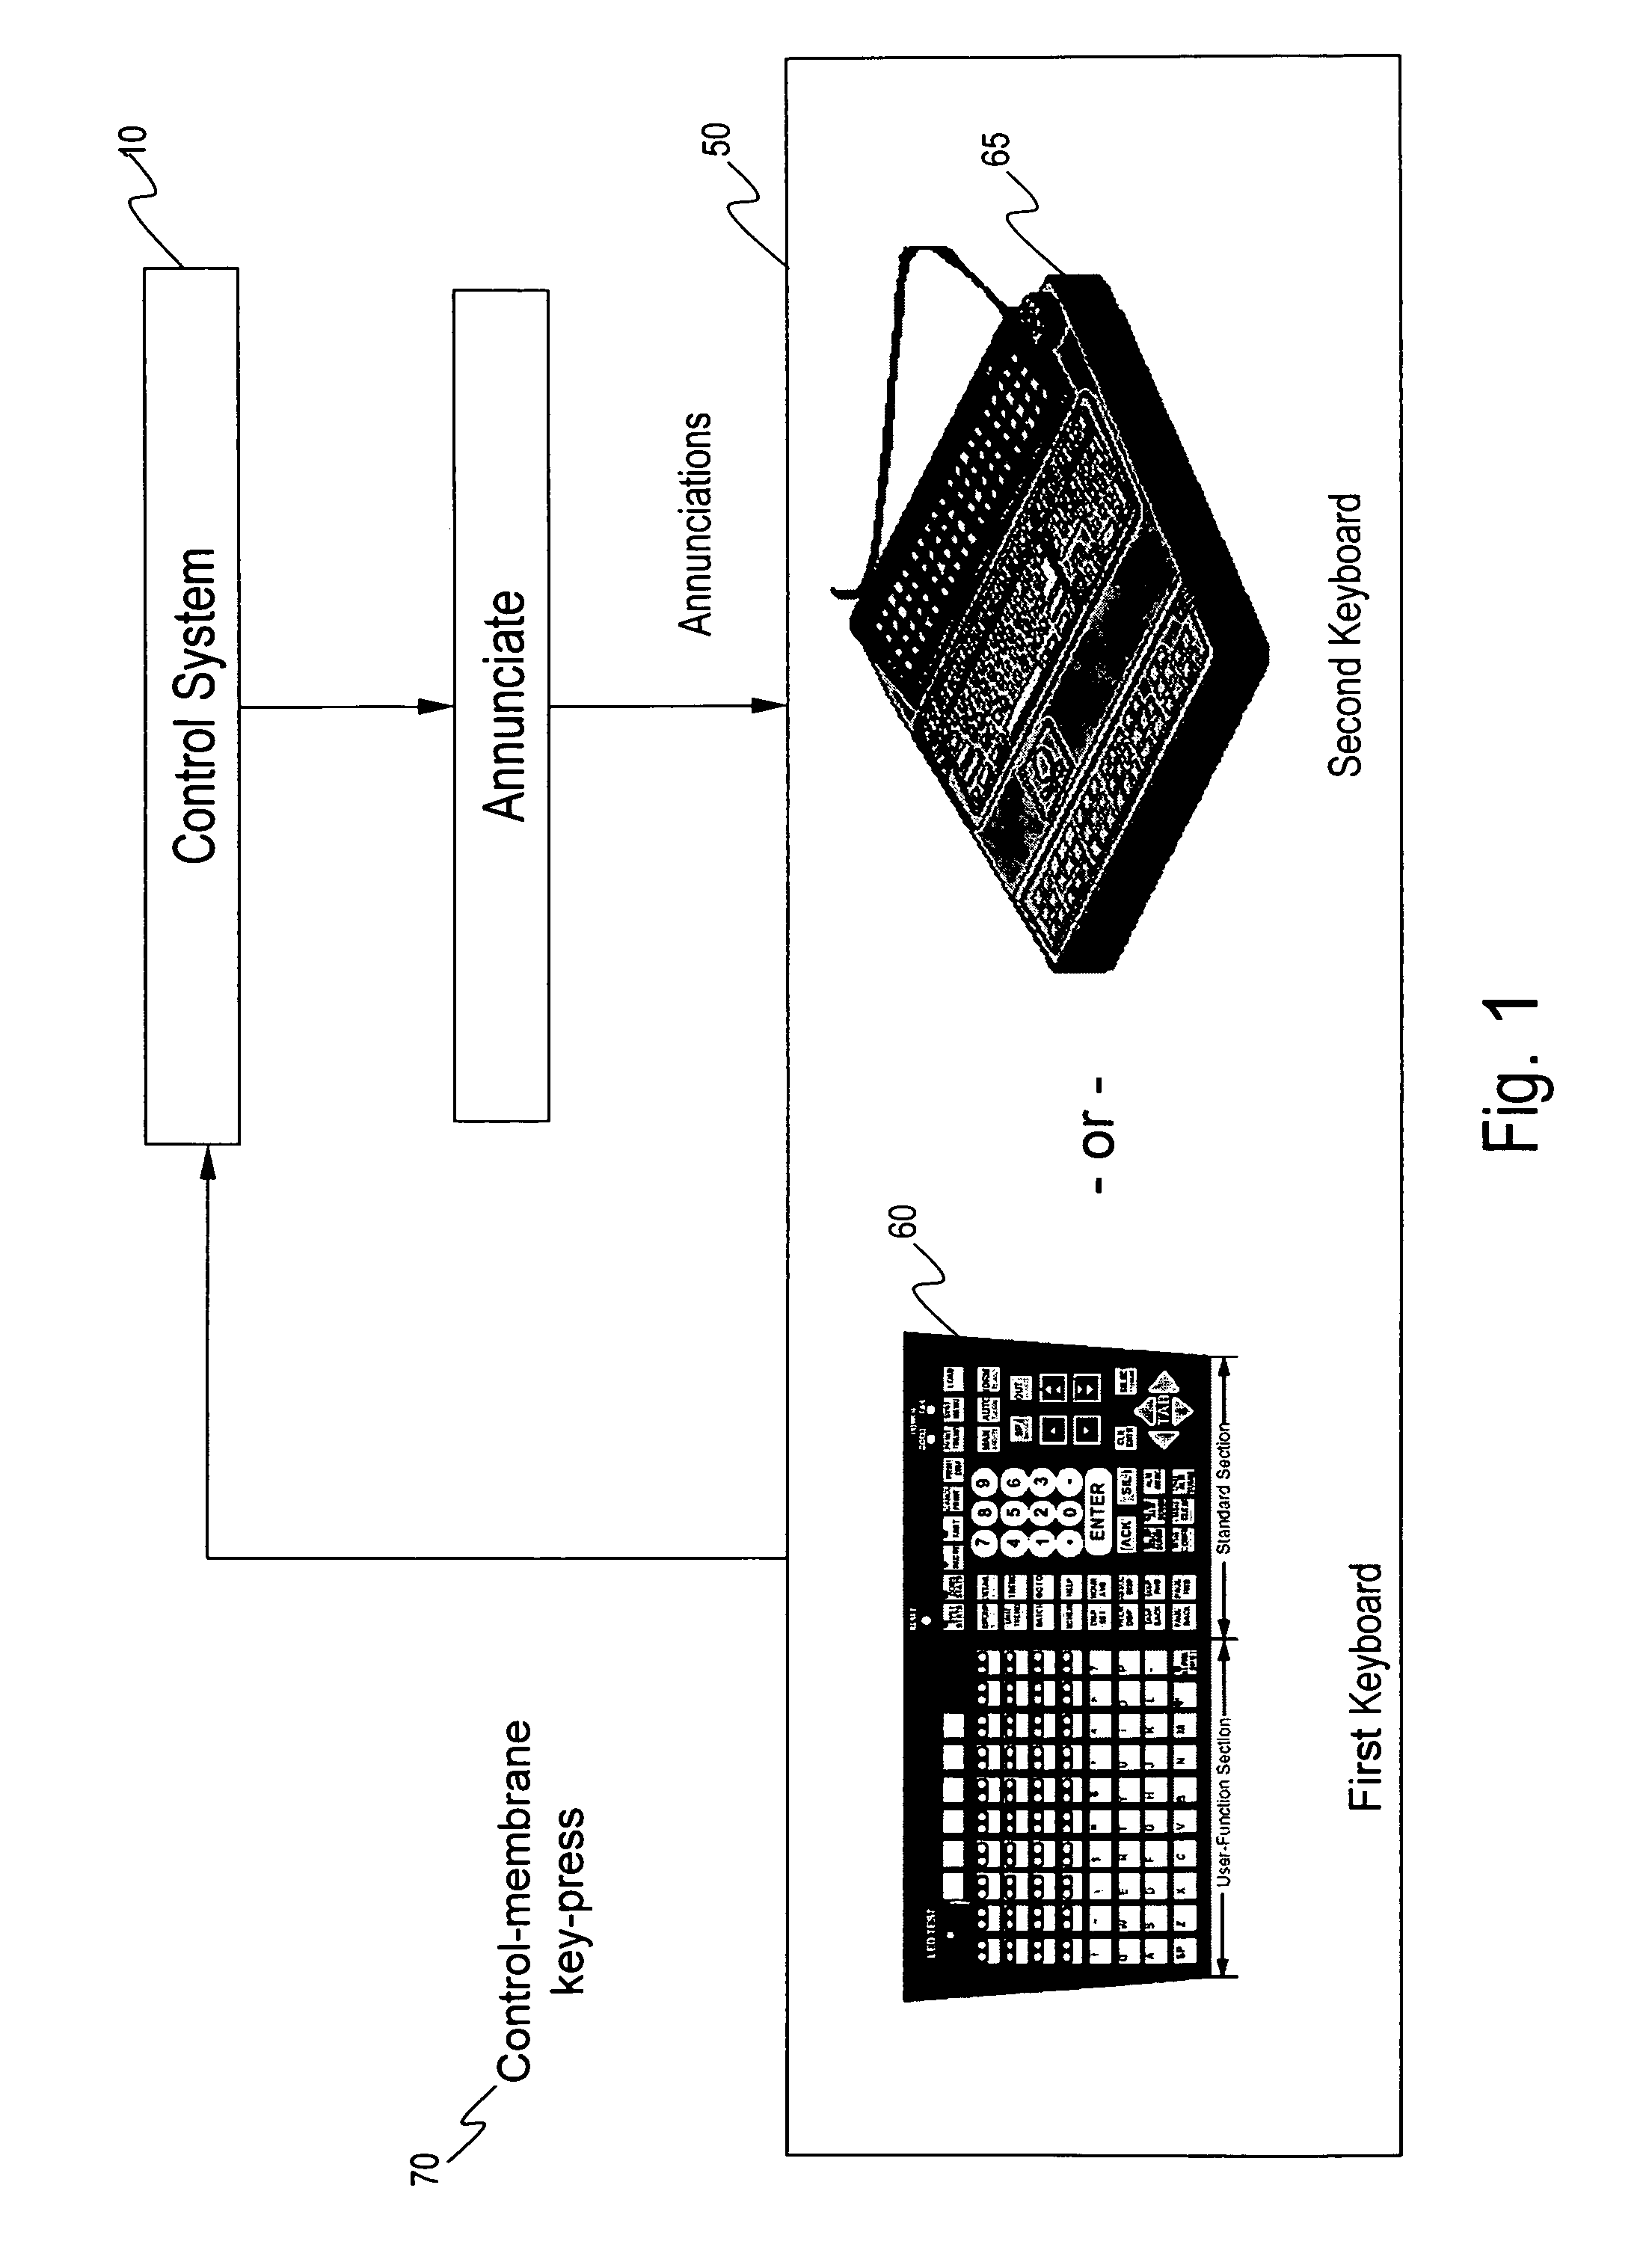 Method and apparatus for use of multiple control systems